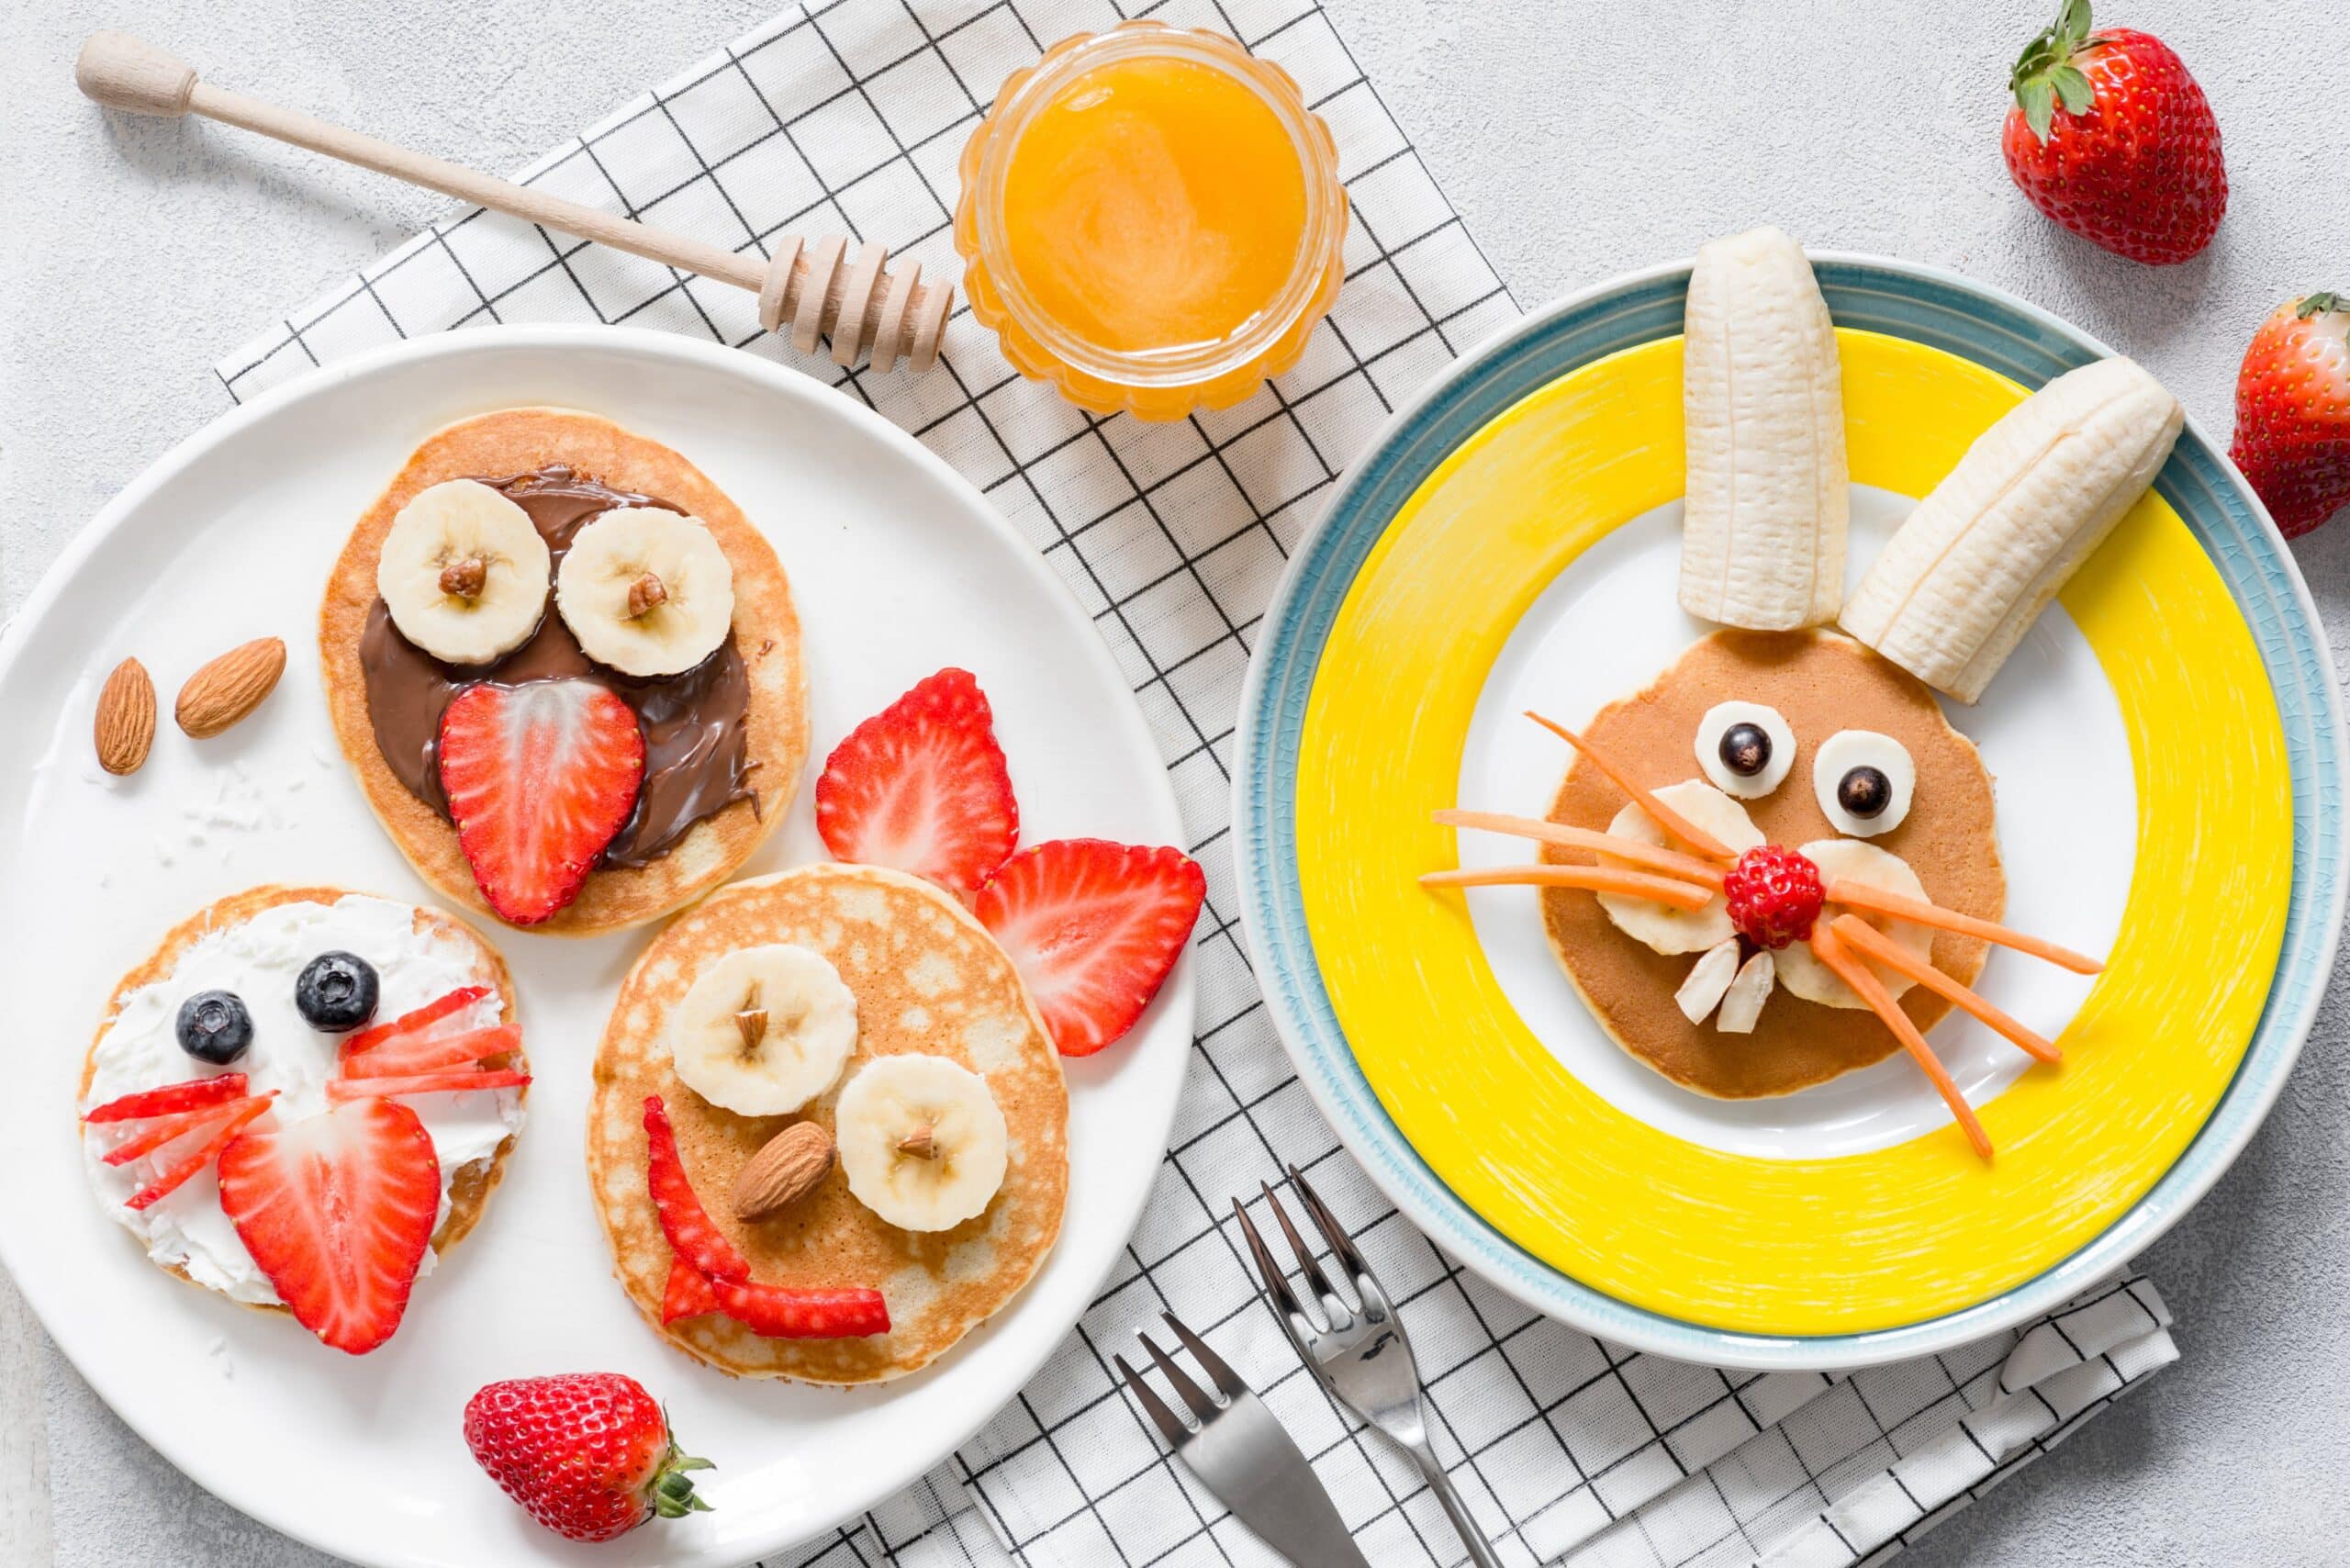 Healthy Easter-themed pancakes decorated to look like a bunny and chick, surrounded by fresh strawberries, bananas, and a dish of honey.